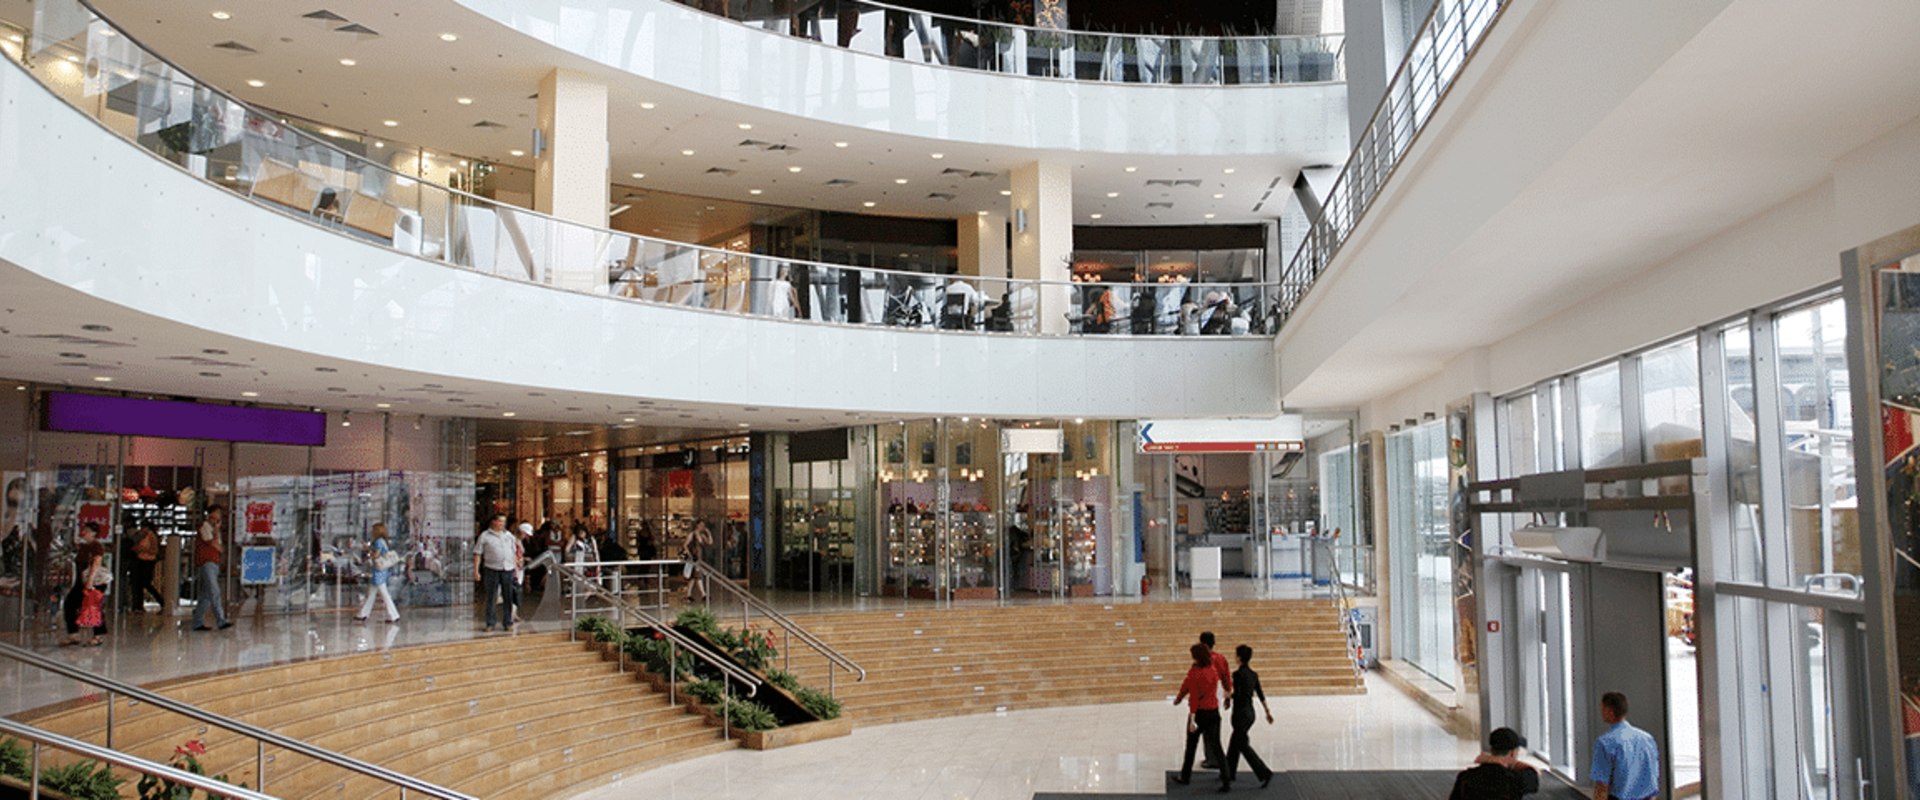 North Star Mall - All You Need to Know BEFORE You Go (with Photos)